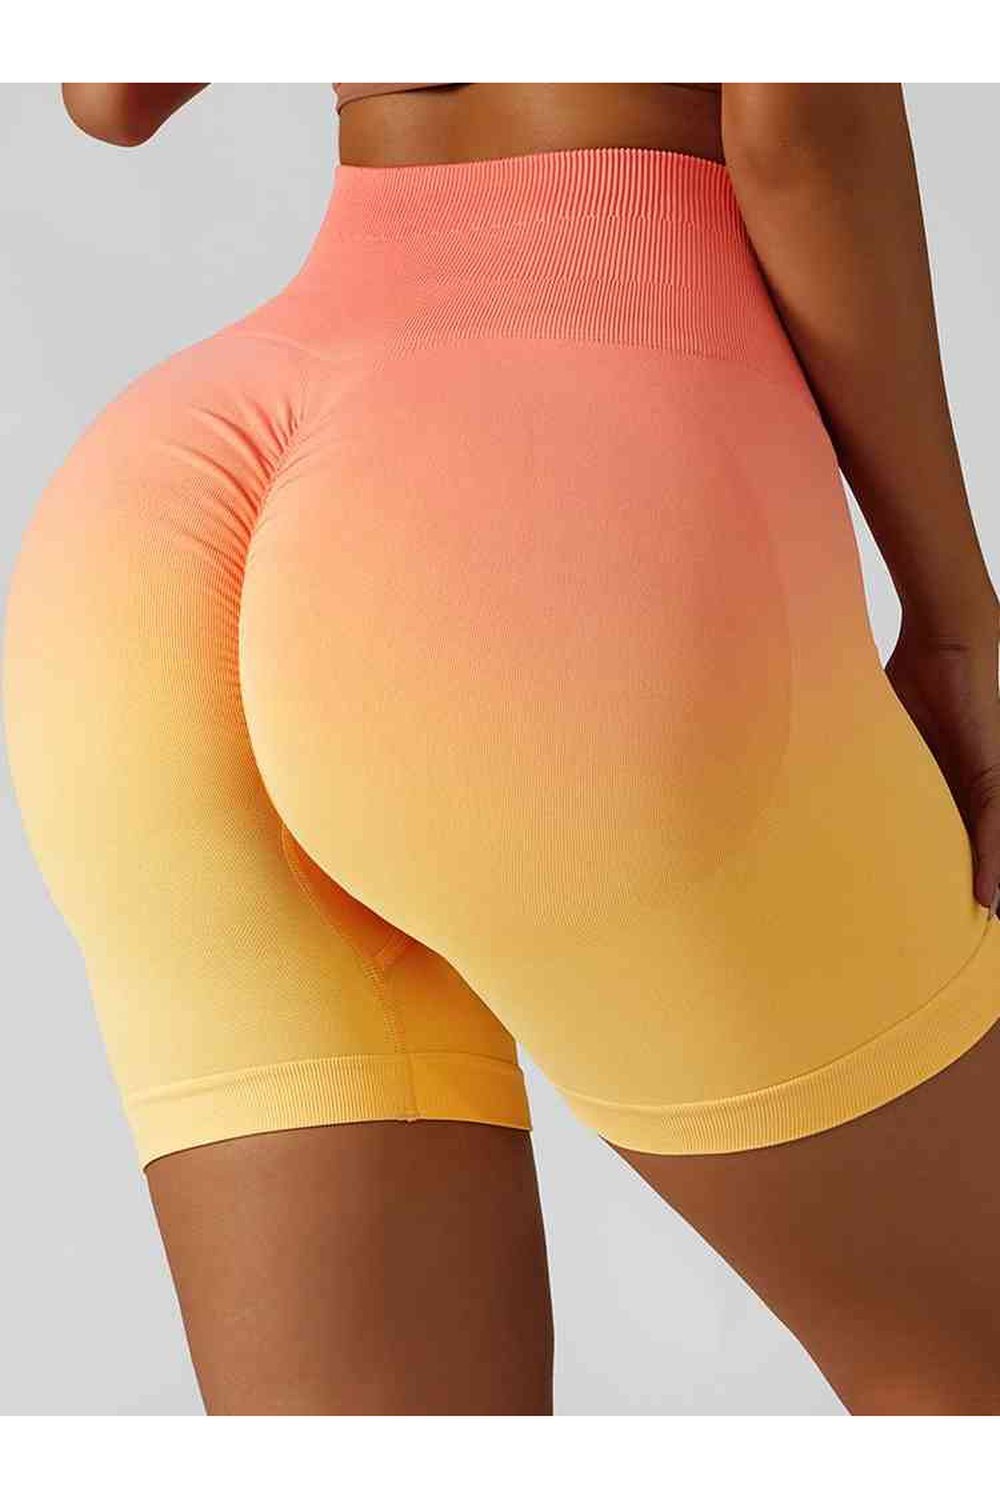 Gradient Wide Waistband Slim Fit Sports Shorts - Short Leggings - FITGGINS